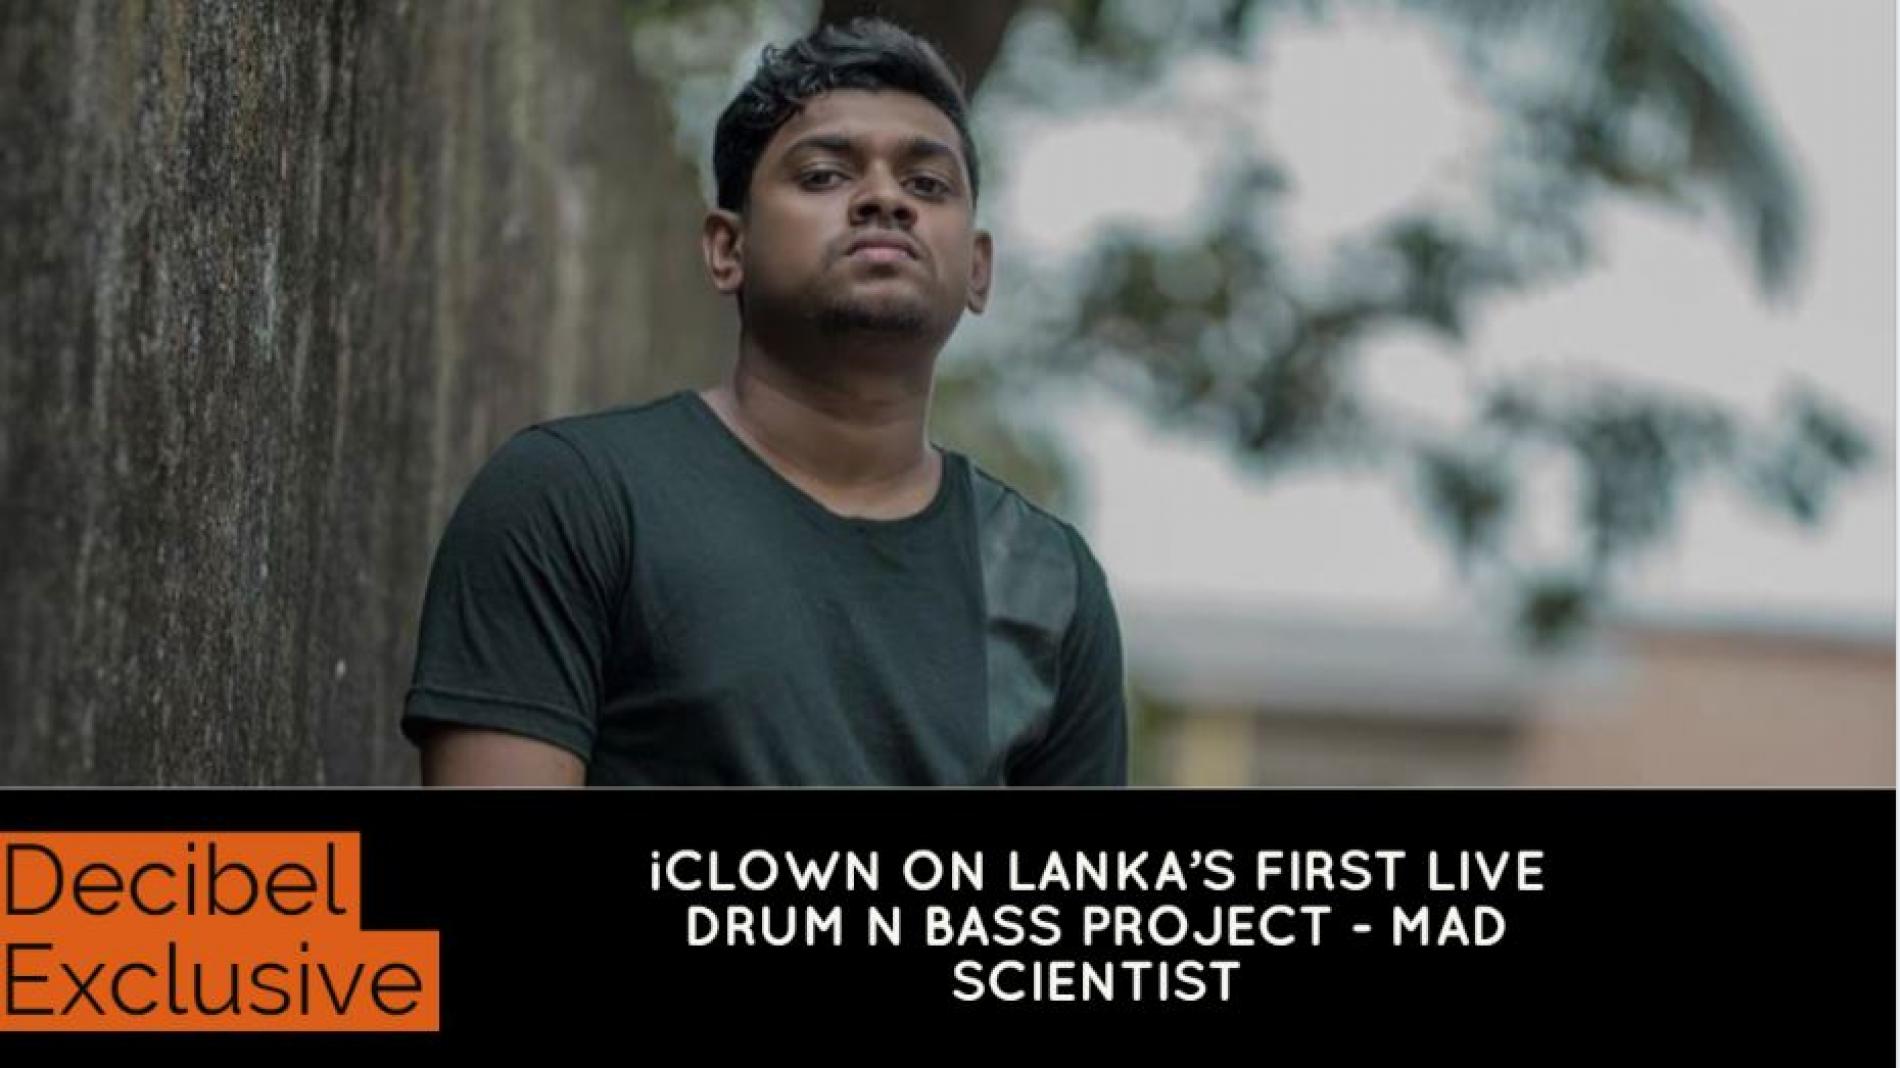 Lanka Has It’s First Live Drum N Bass Project & They Debut This Weekend